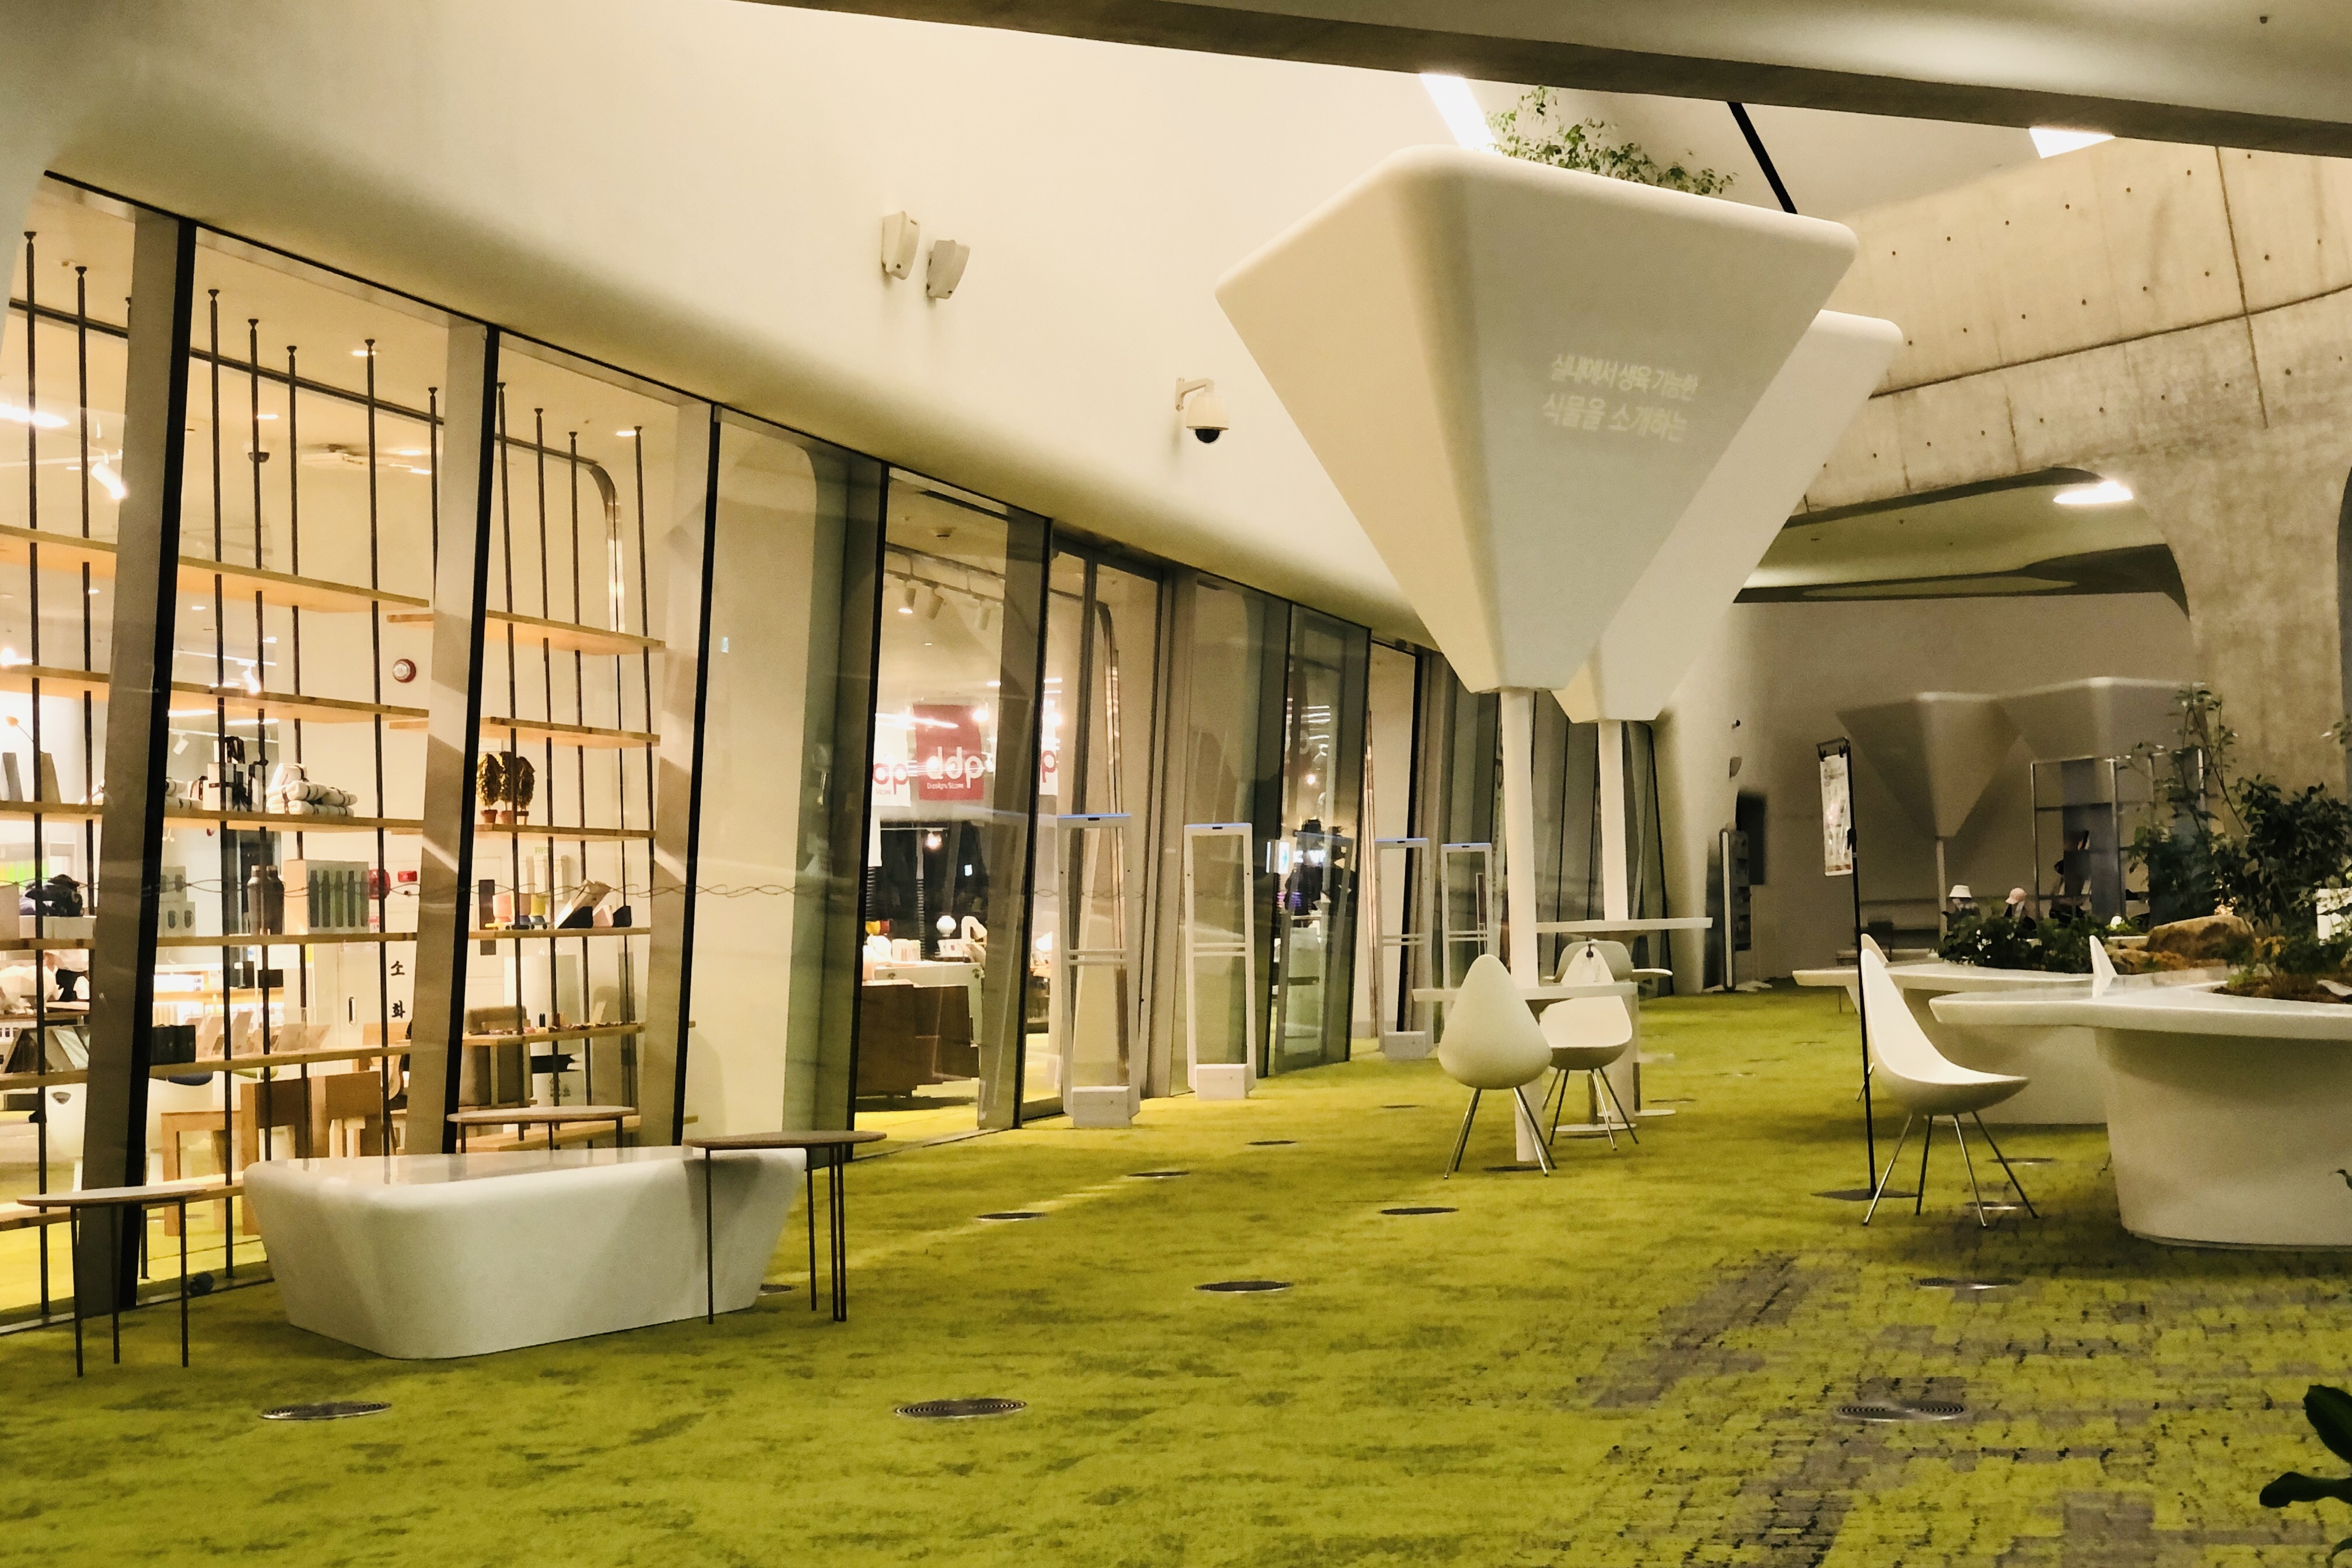 Dongdaemun Design Plaza2 : Dongdaemun Design Plaza's convenient facilities where indoor floor is covered with grass  
